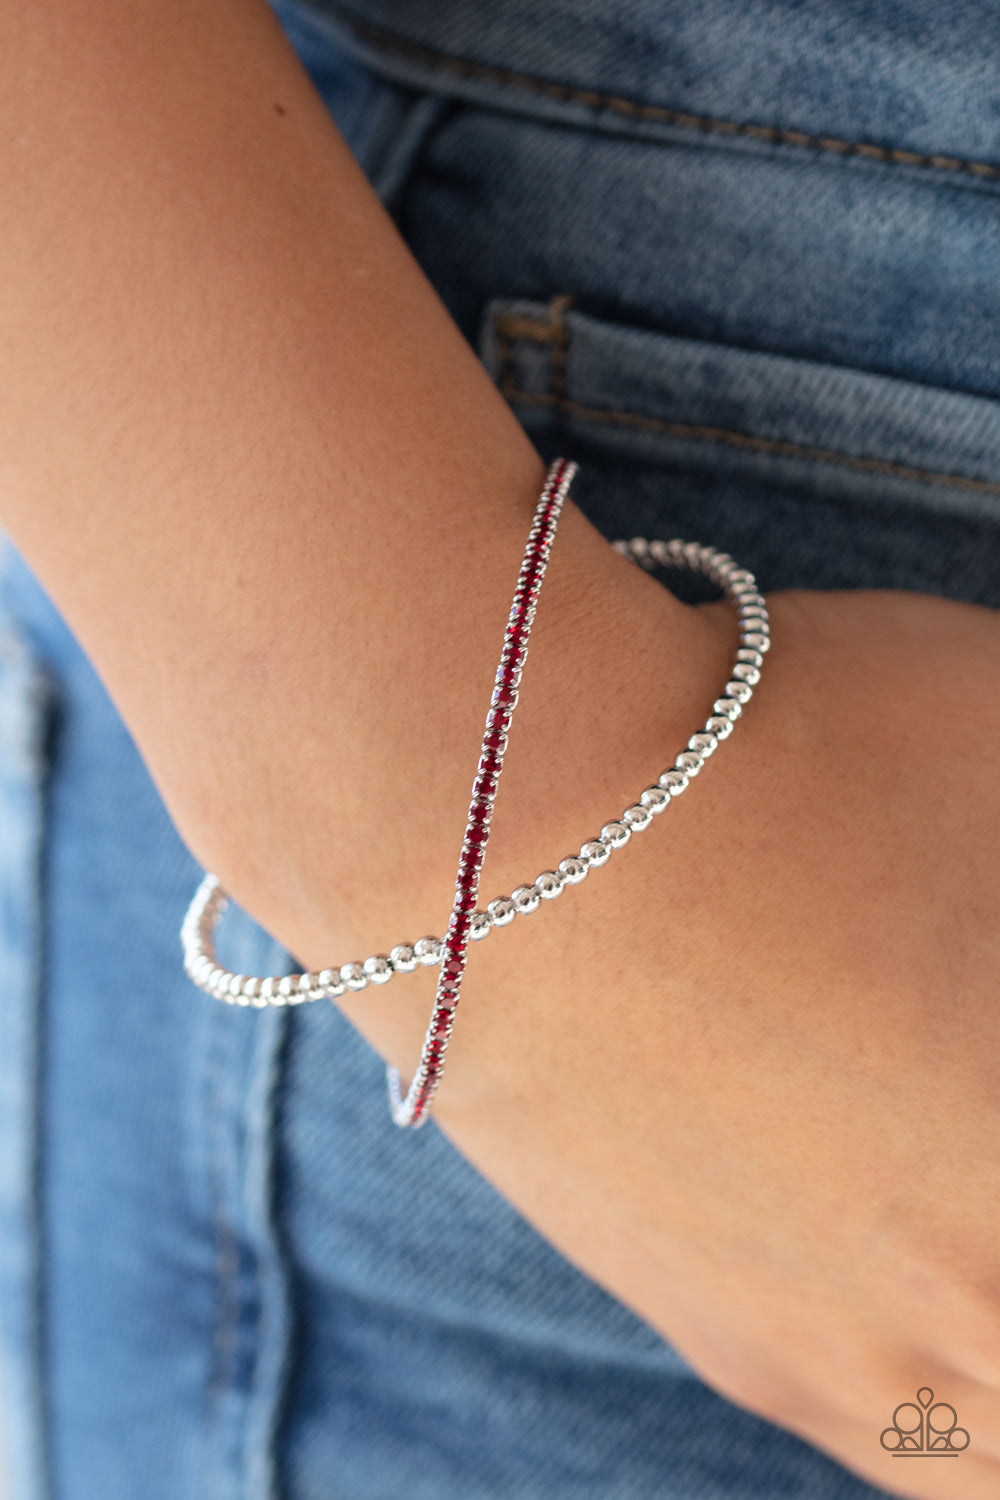 Paparazzi Bracelets  - Chicly Crisscrossed - Red